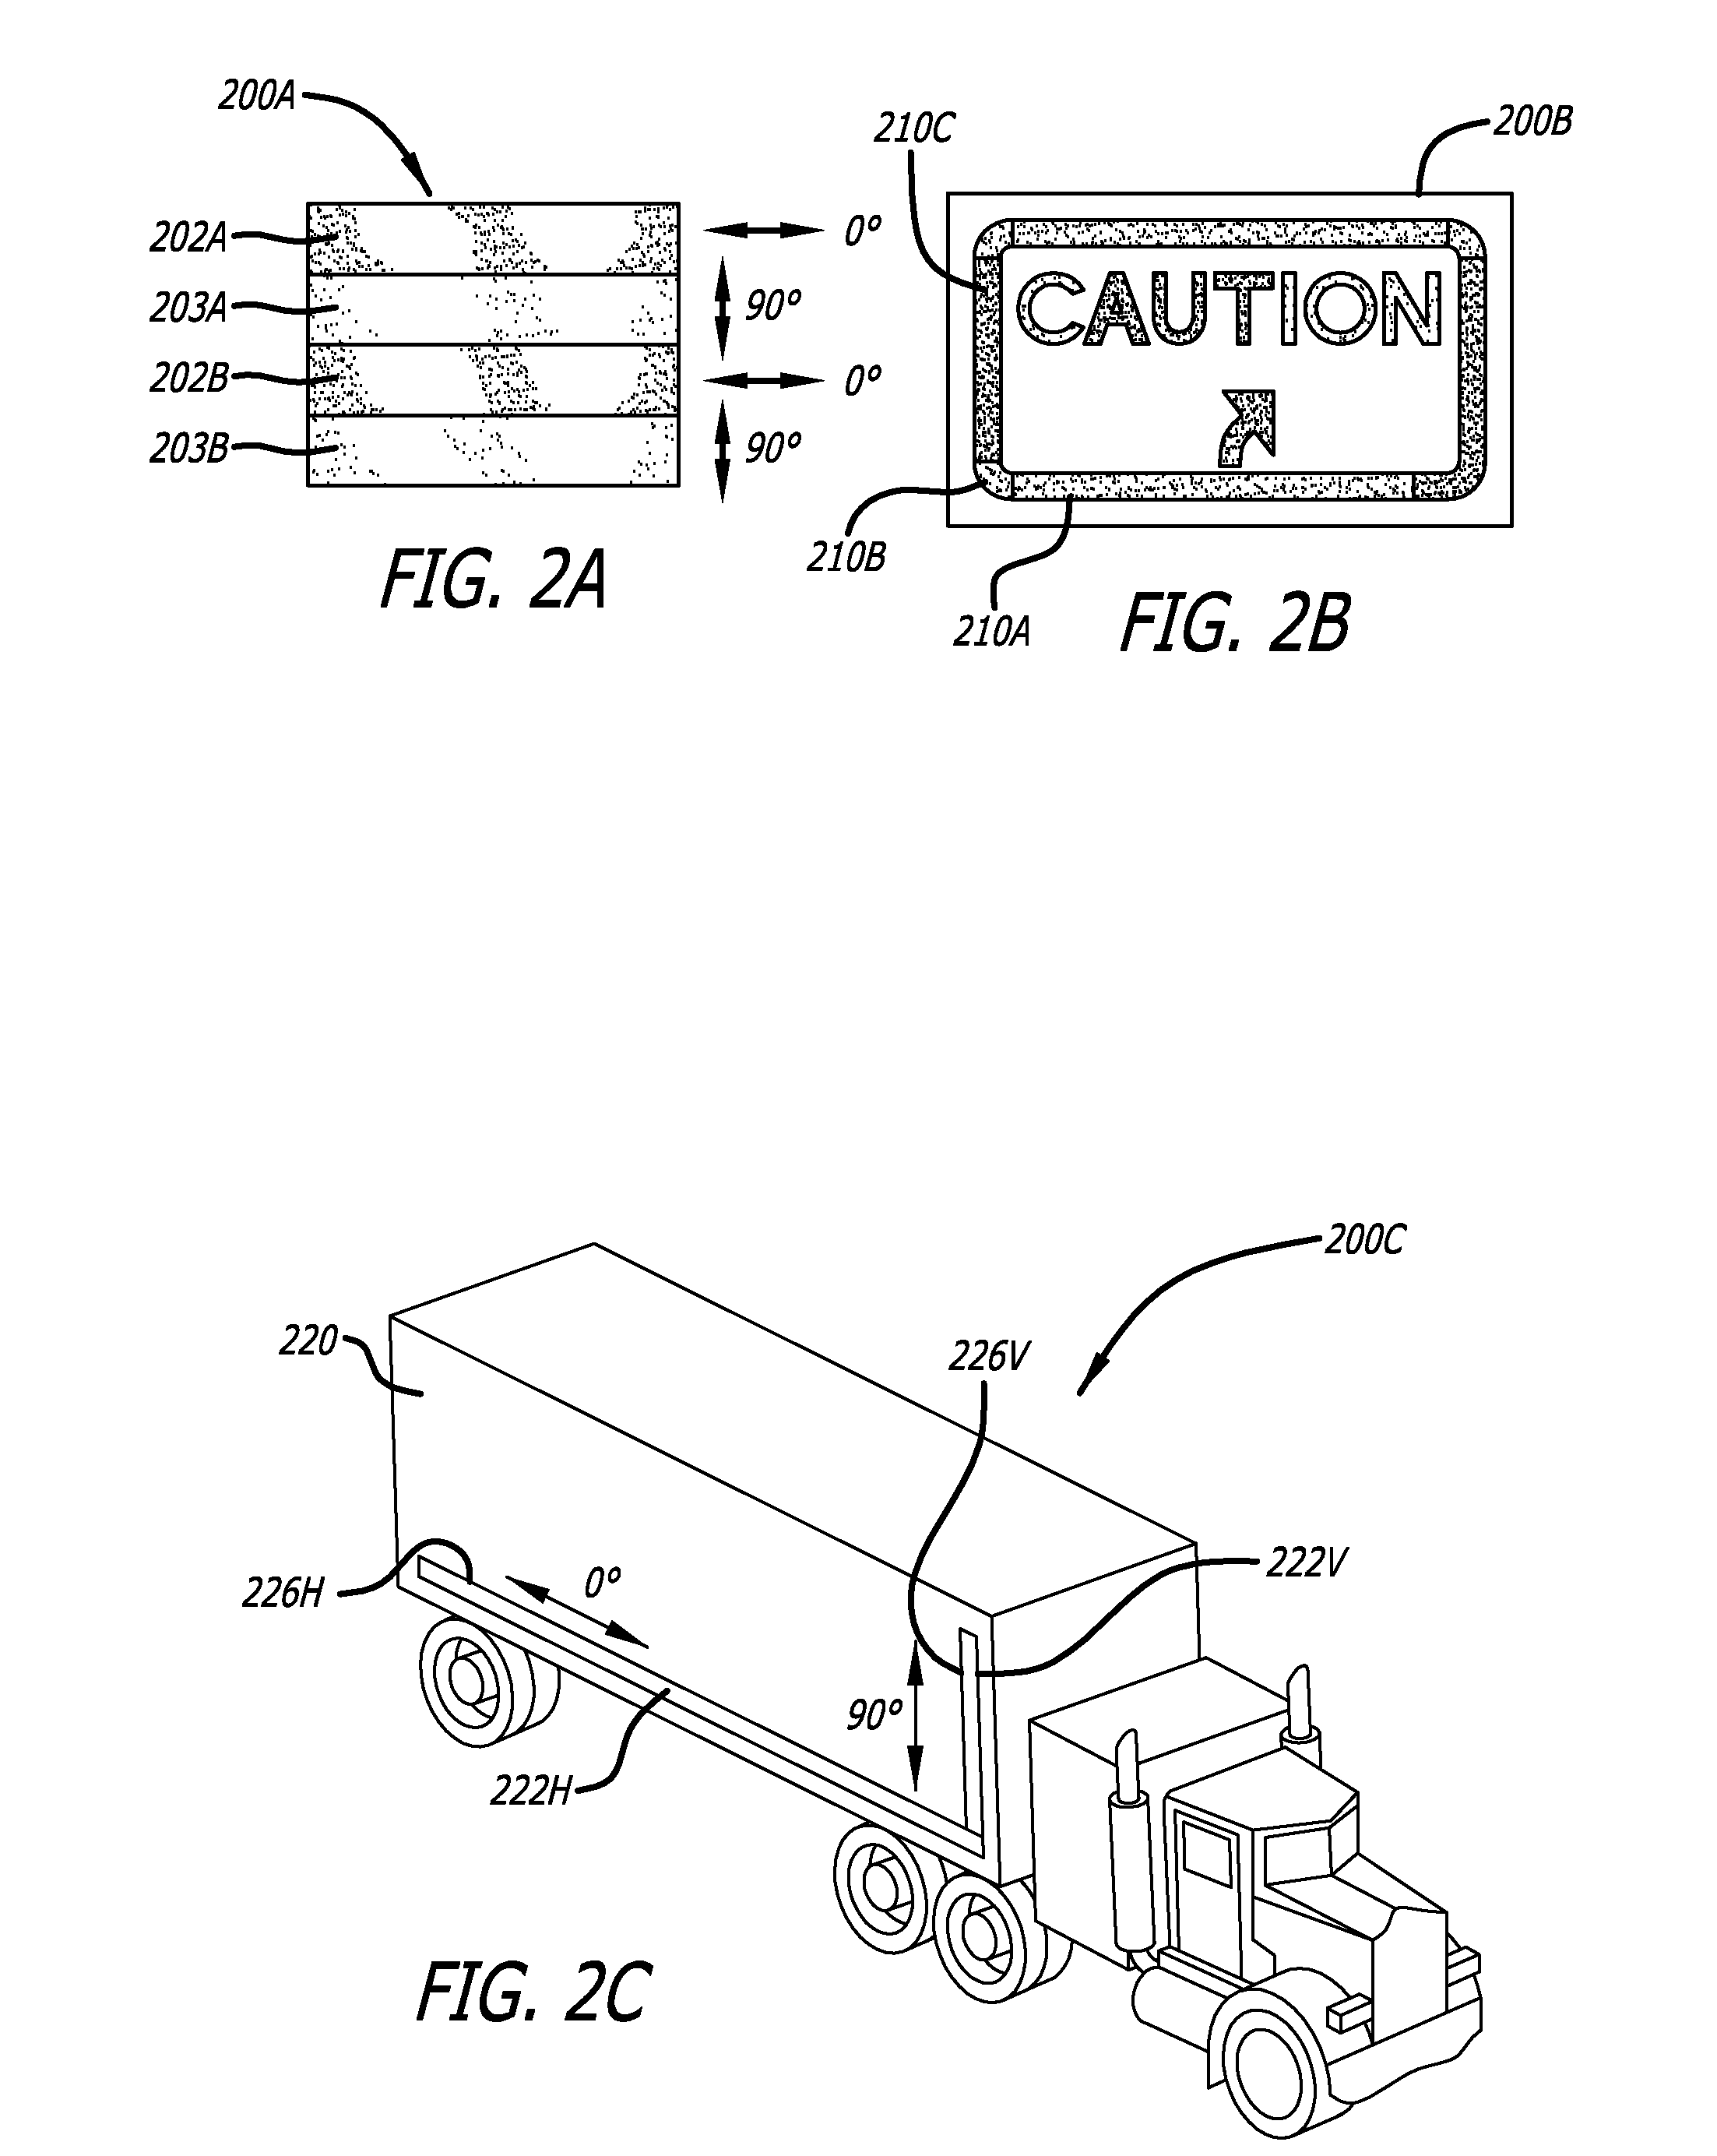 Patterned sheeting with periodic rotated patterned regions